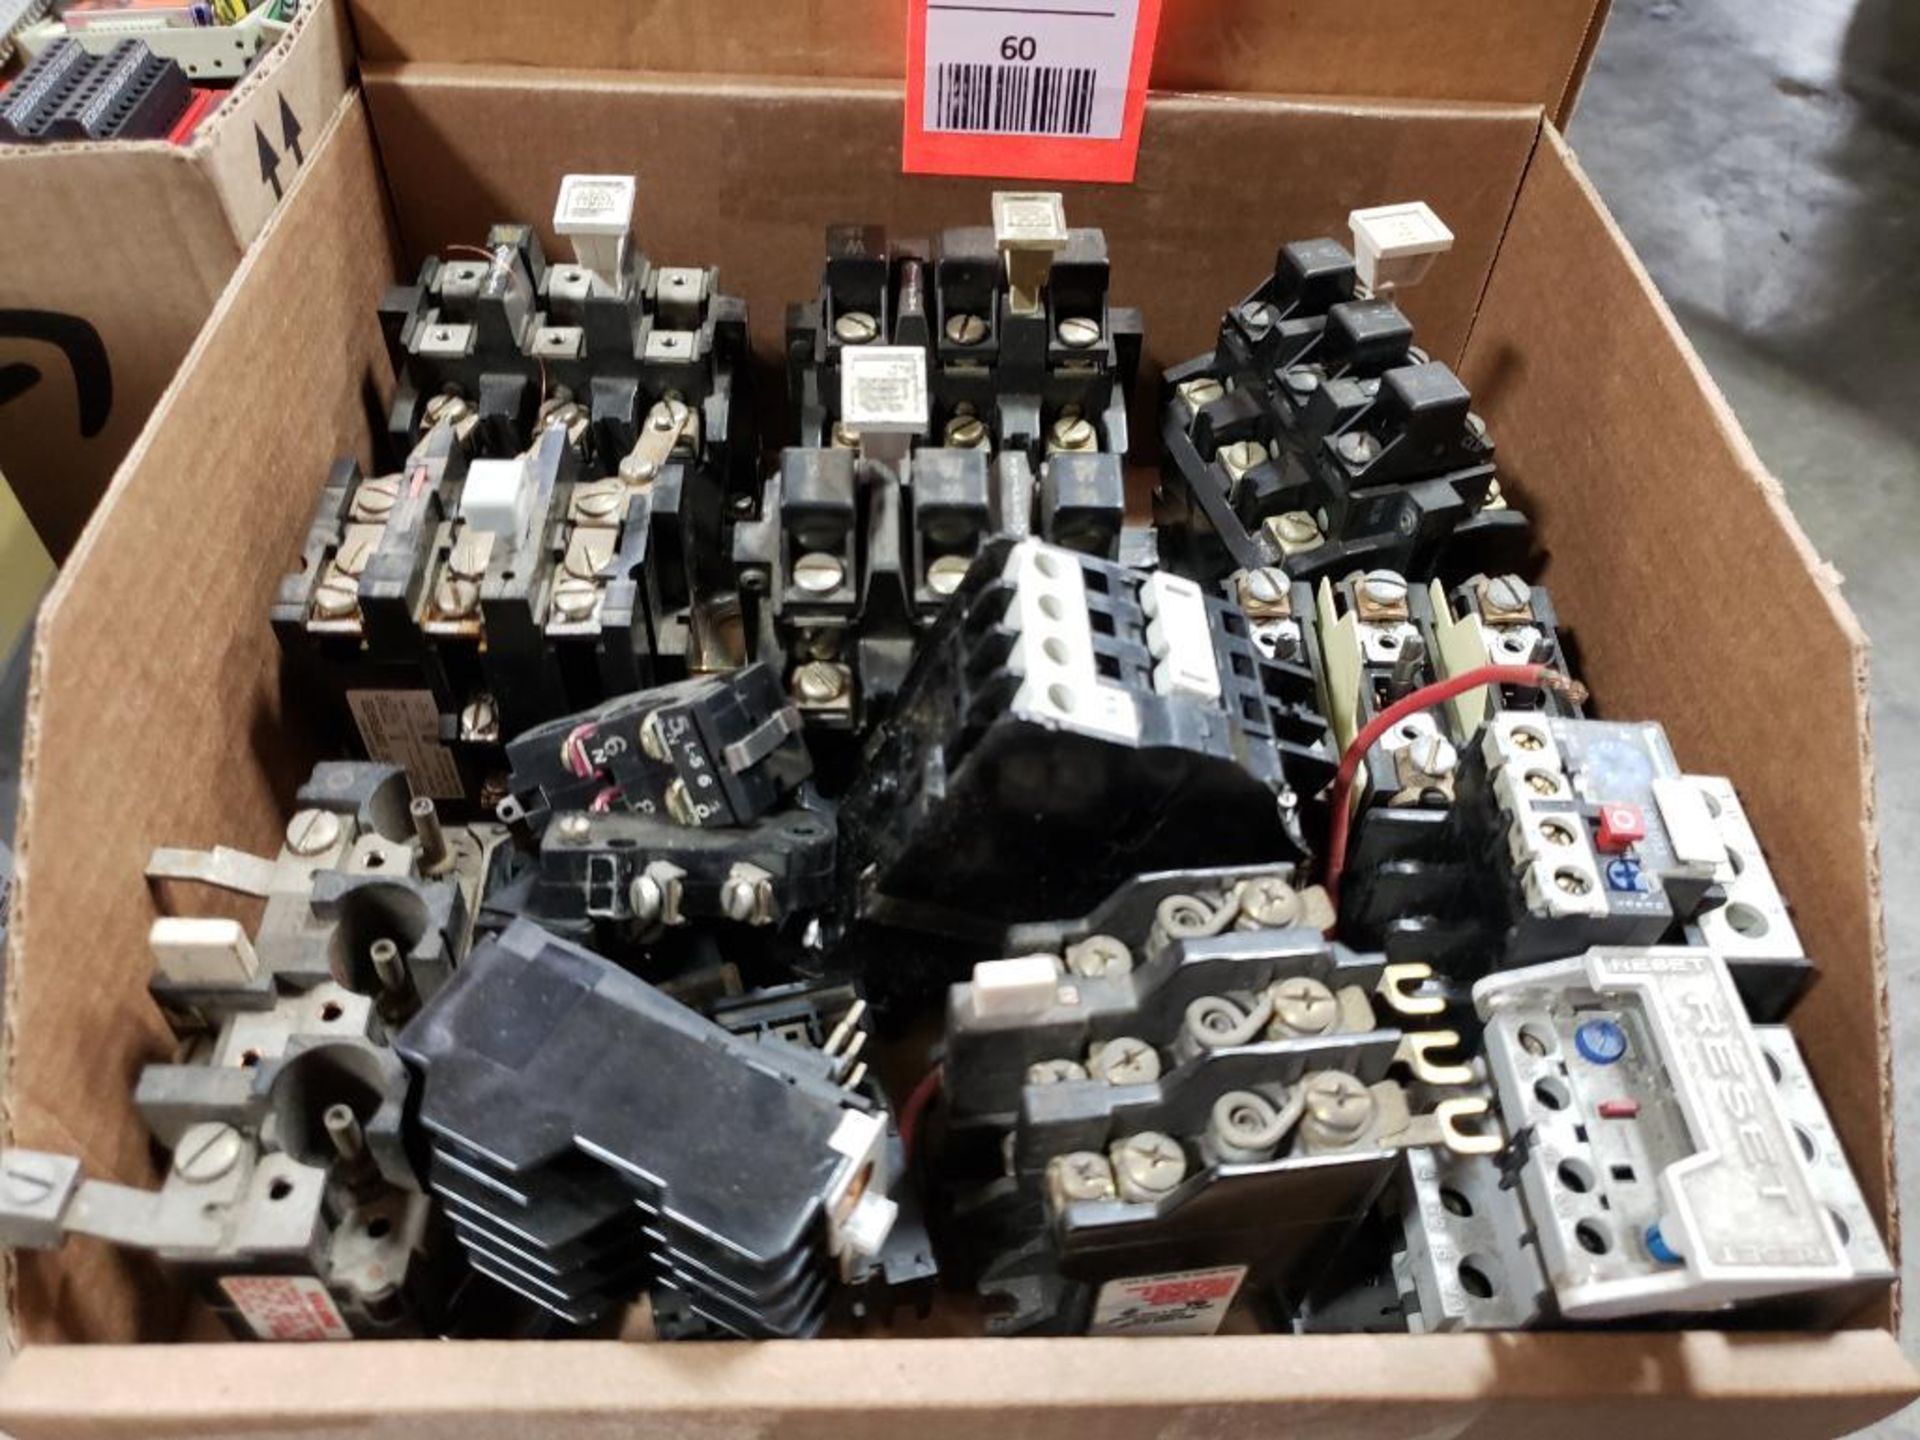 Assorted electrical starter relay, contactor.